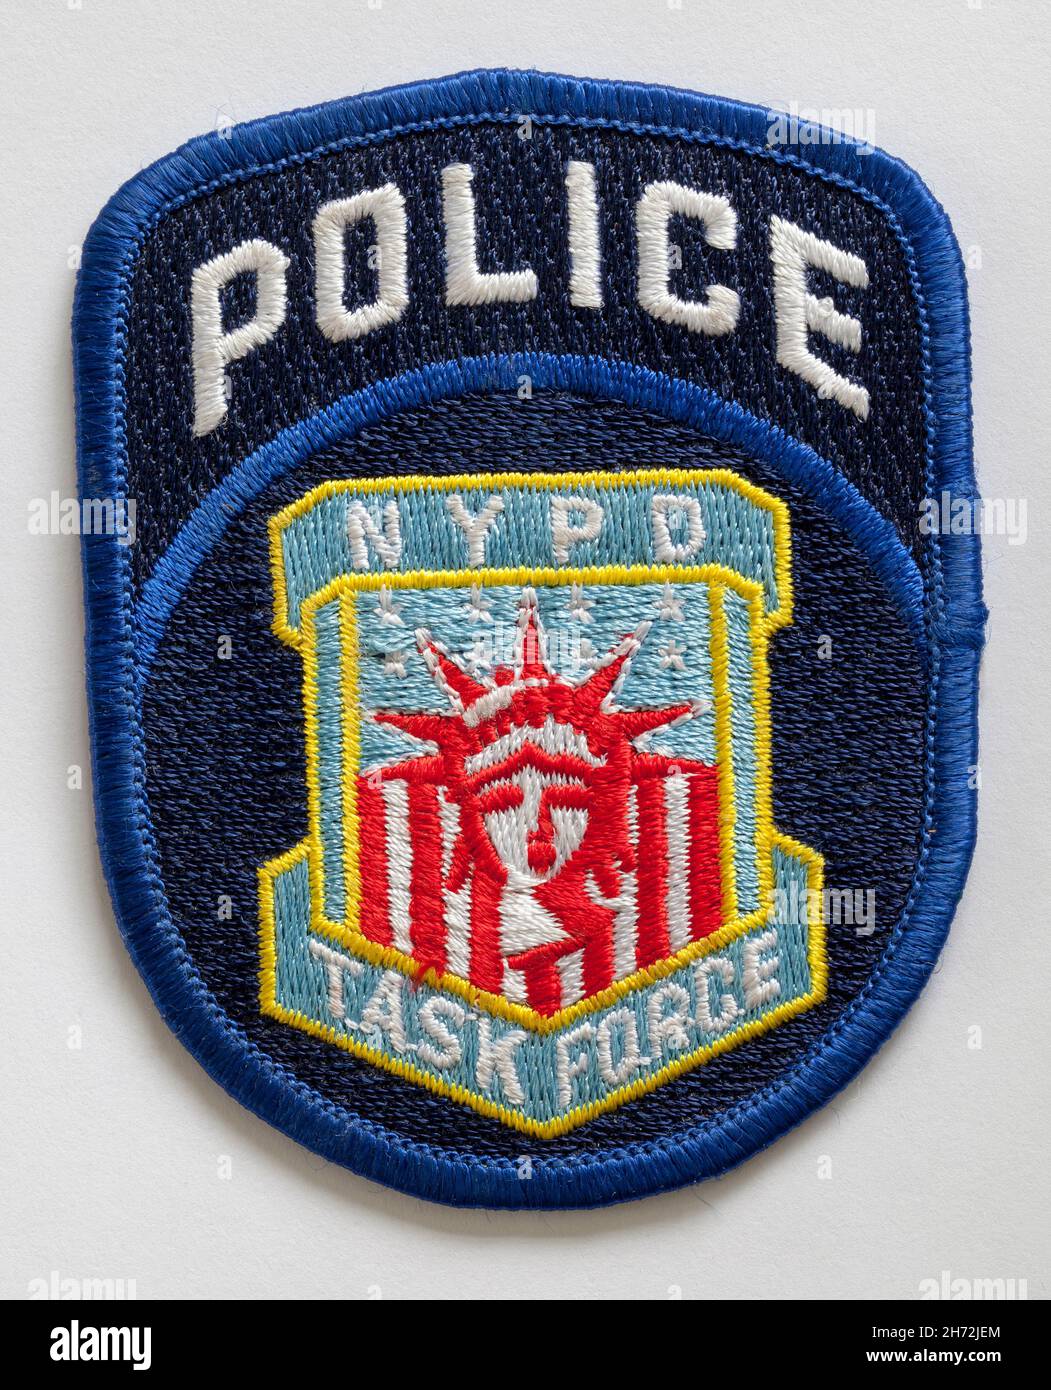 Vintage NYPD Police Task Force Uniform Patch Badge Stockfoto